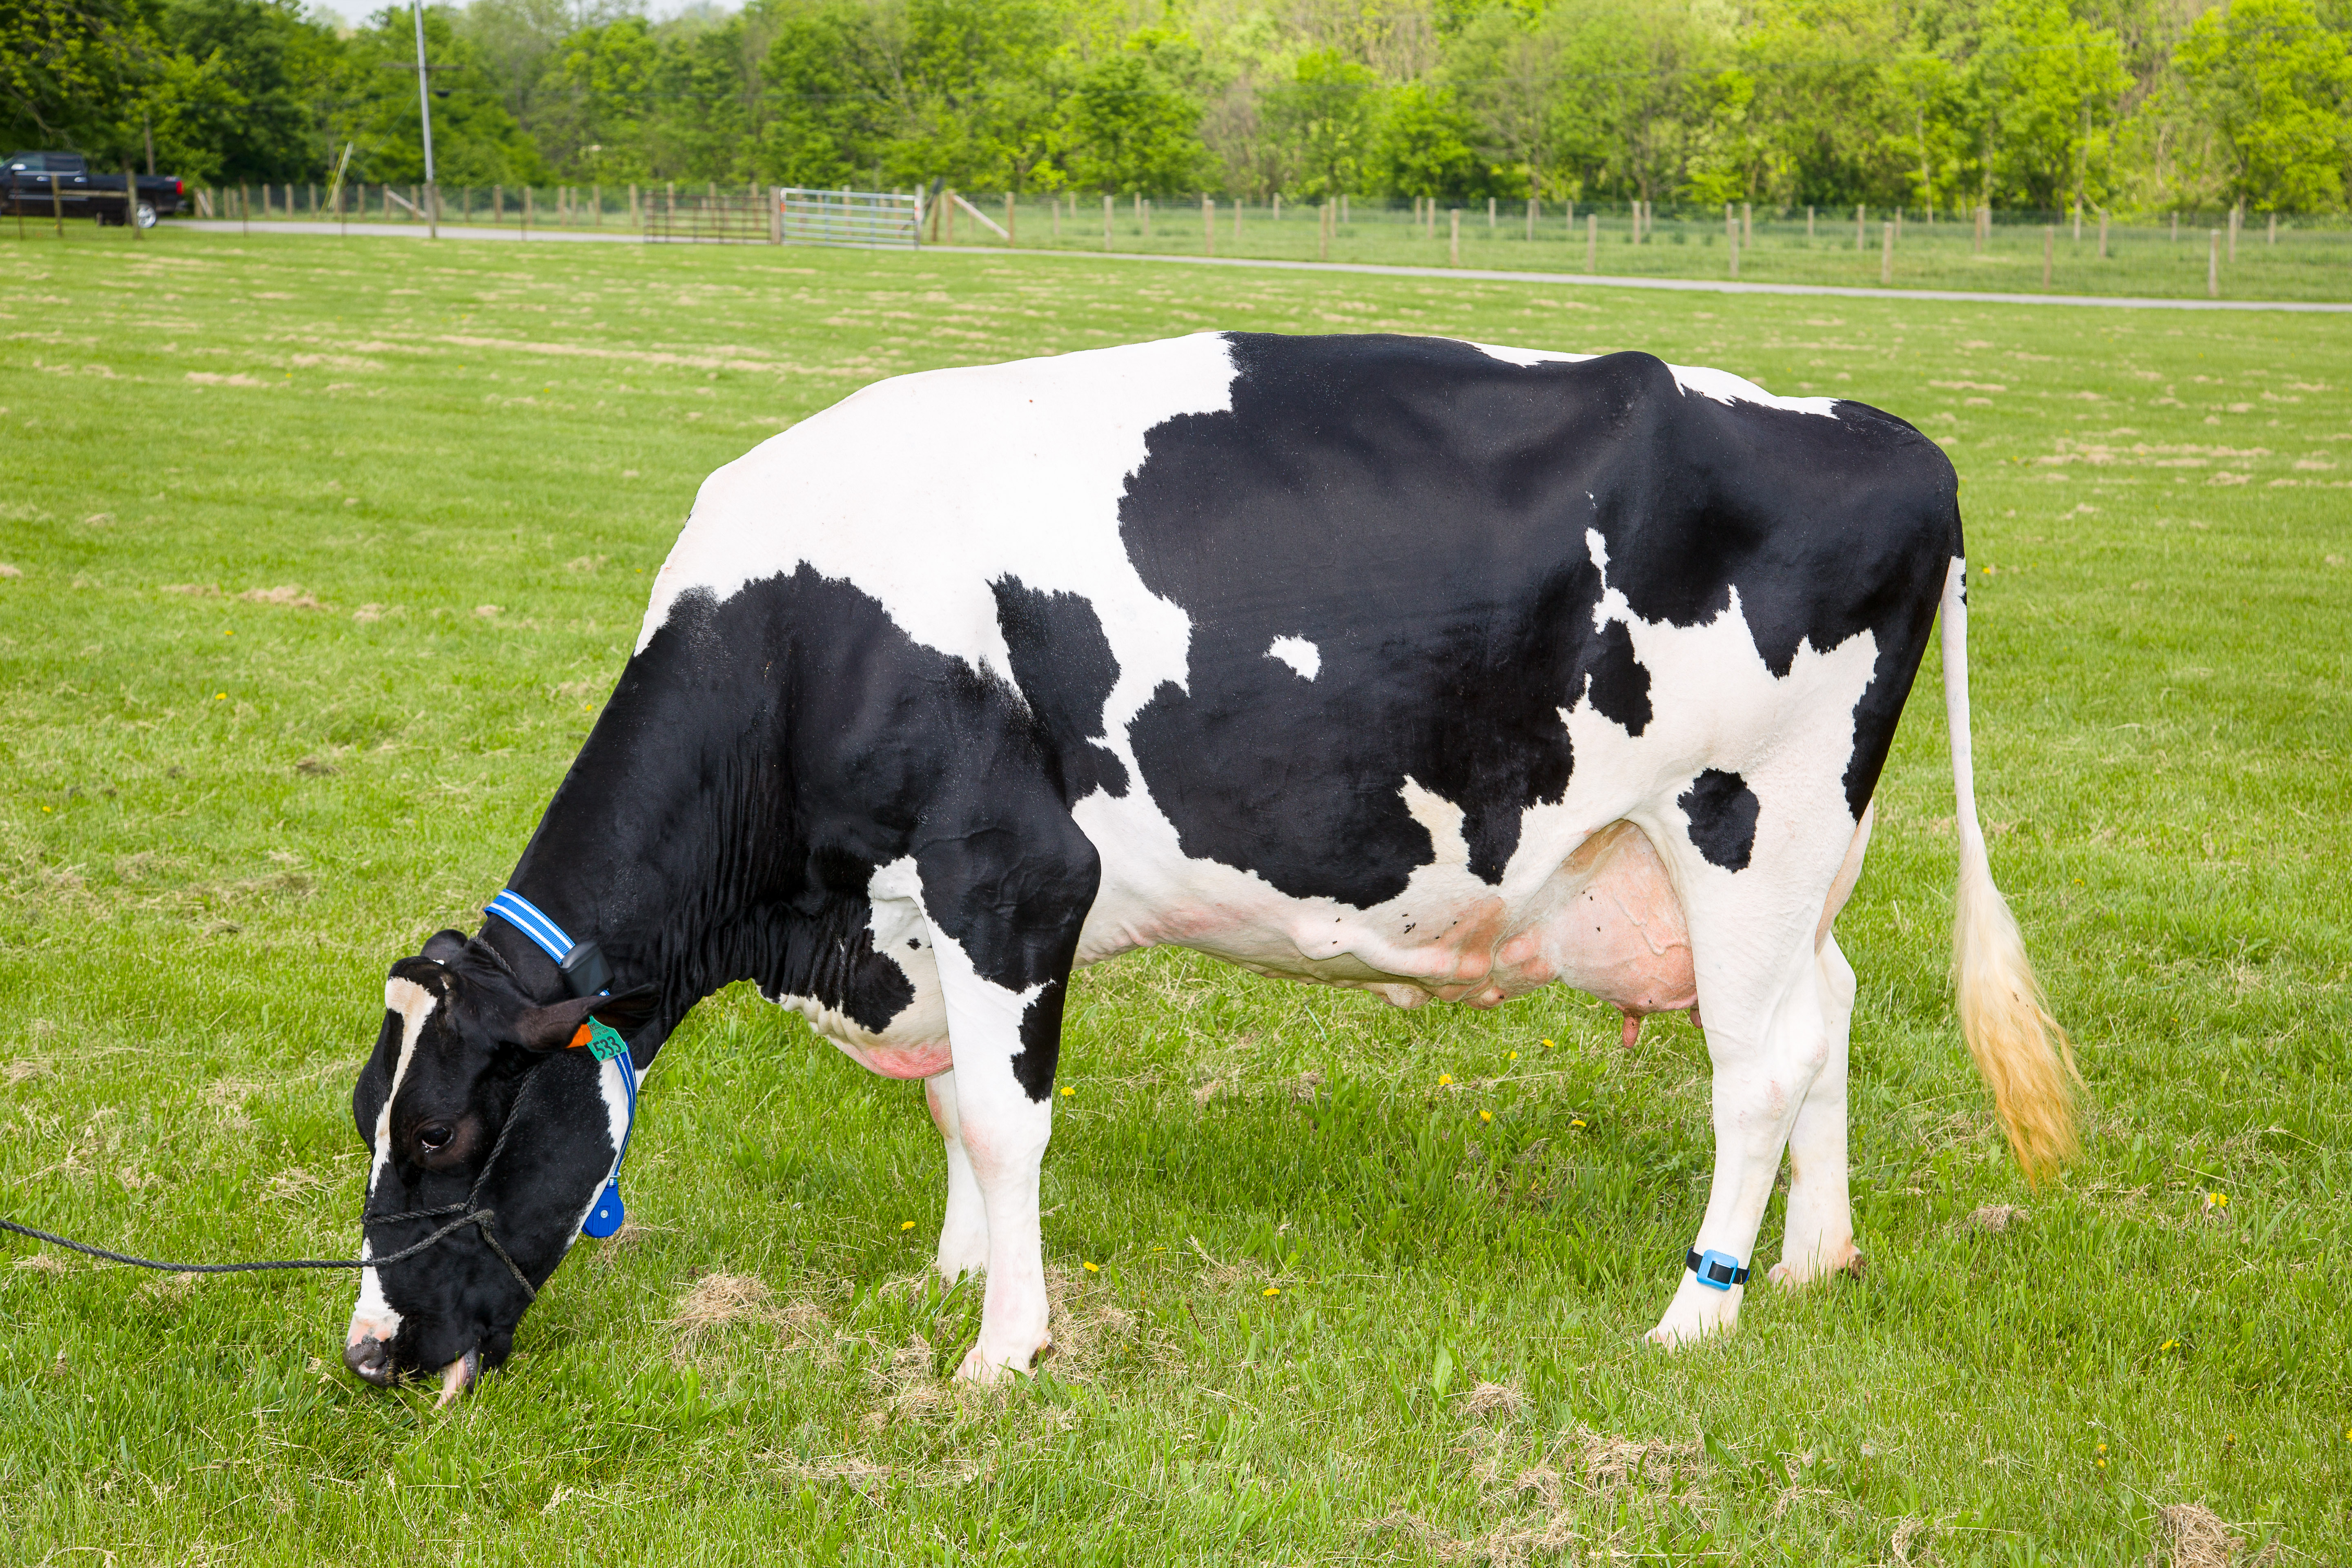 A dairy cow wore the latest precision dairy sensors at the Dairy Research Unit on Coldstream Farm.